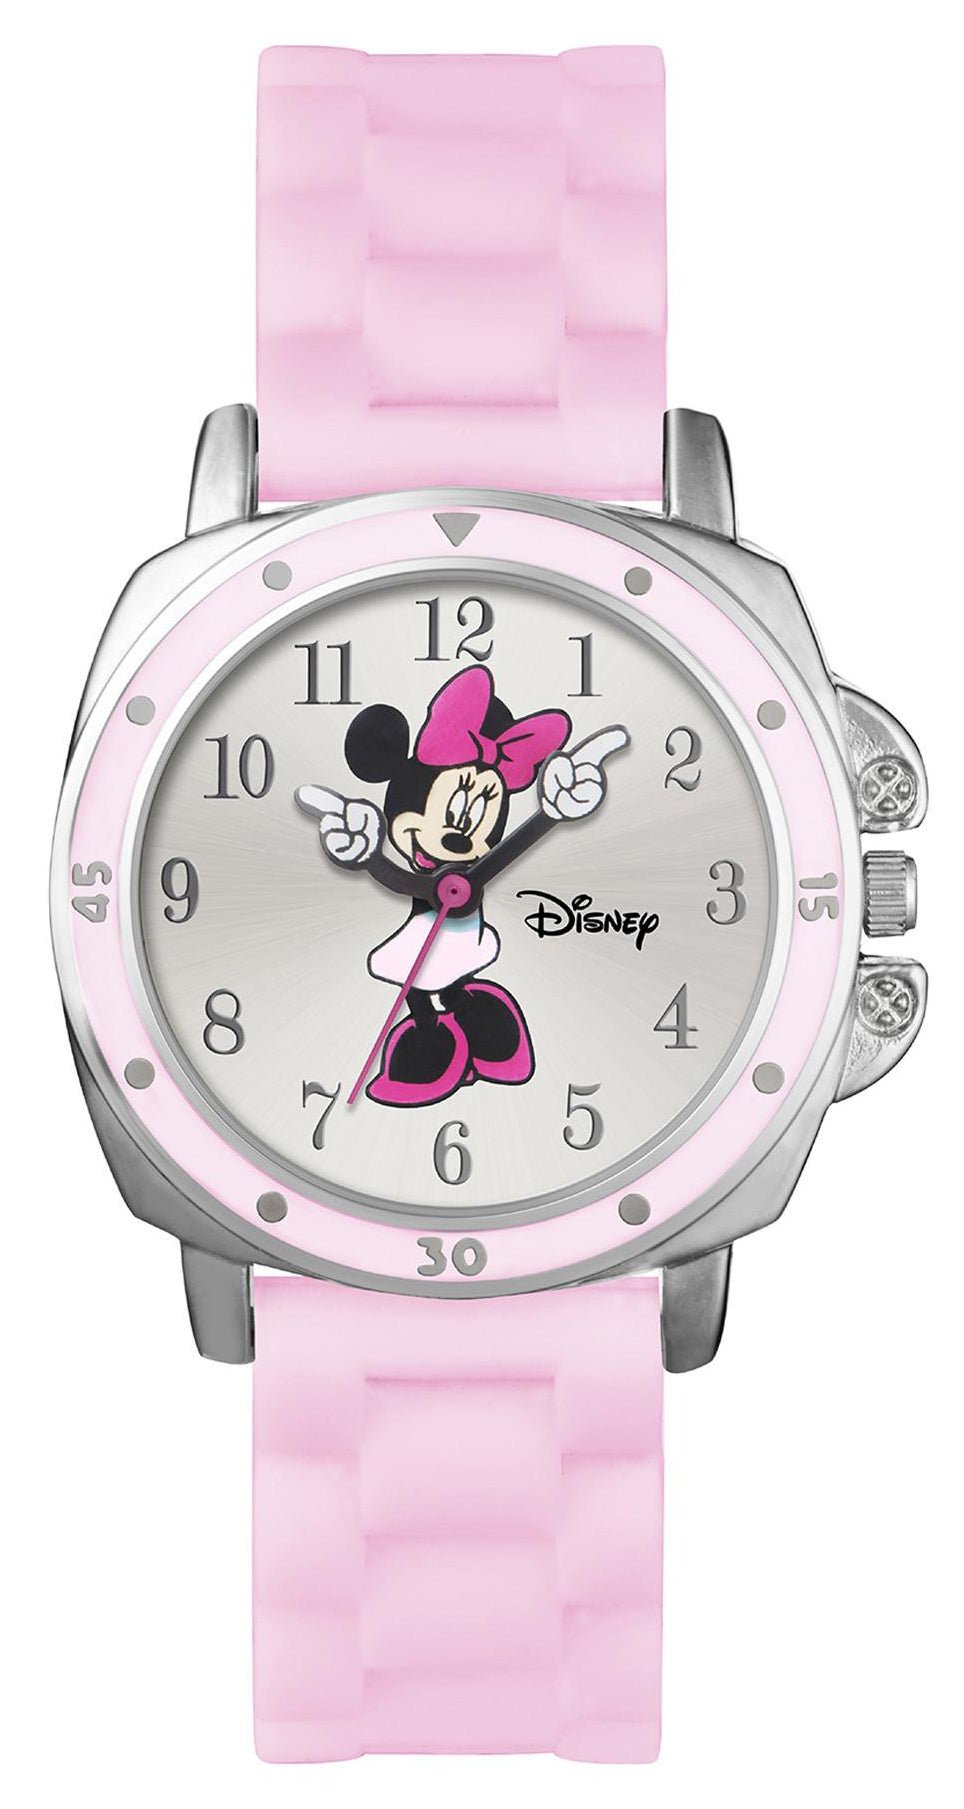 Model: Women's Disney Minnie Mouse Watch with Pink Silicon Strap